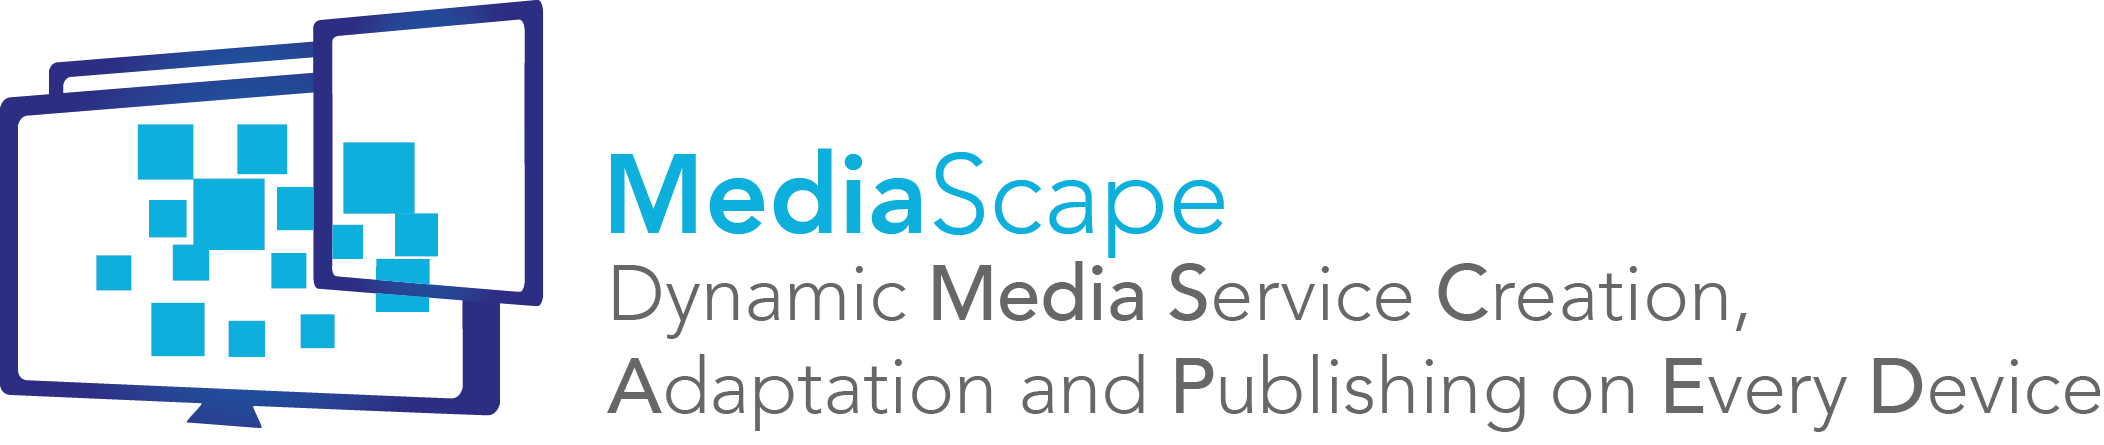 Mikel Zorrilla takes part in the WWW2015 Congress in Florence from 18th to 22nd of May to present MediaScape project.